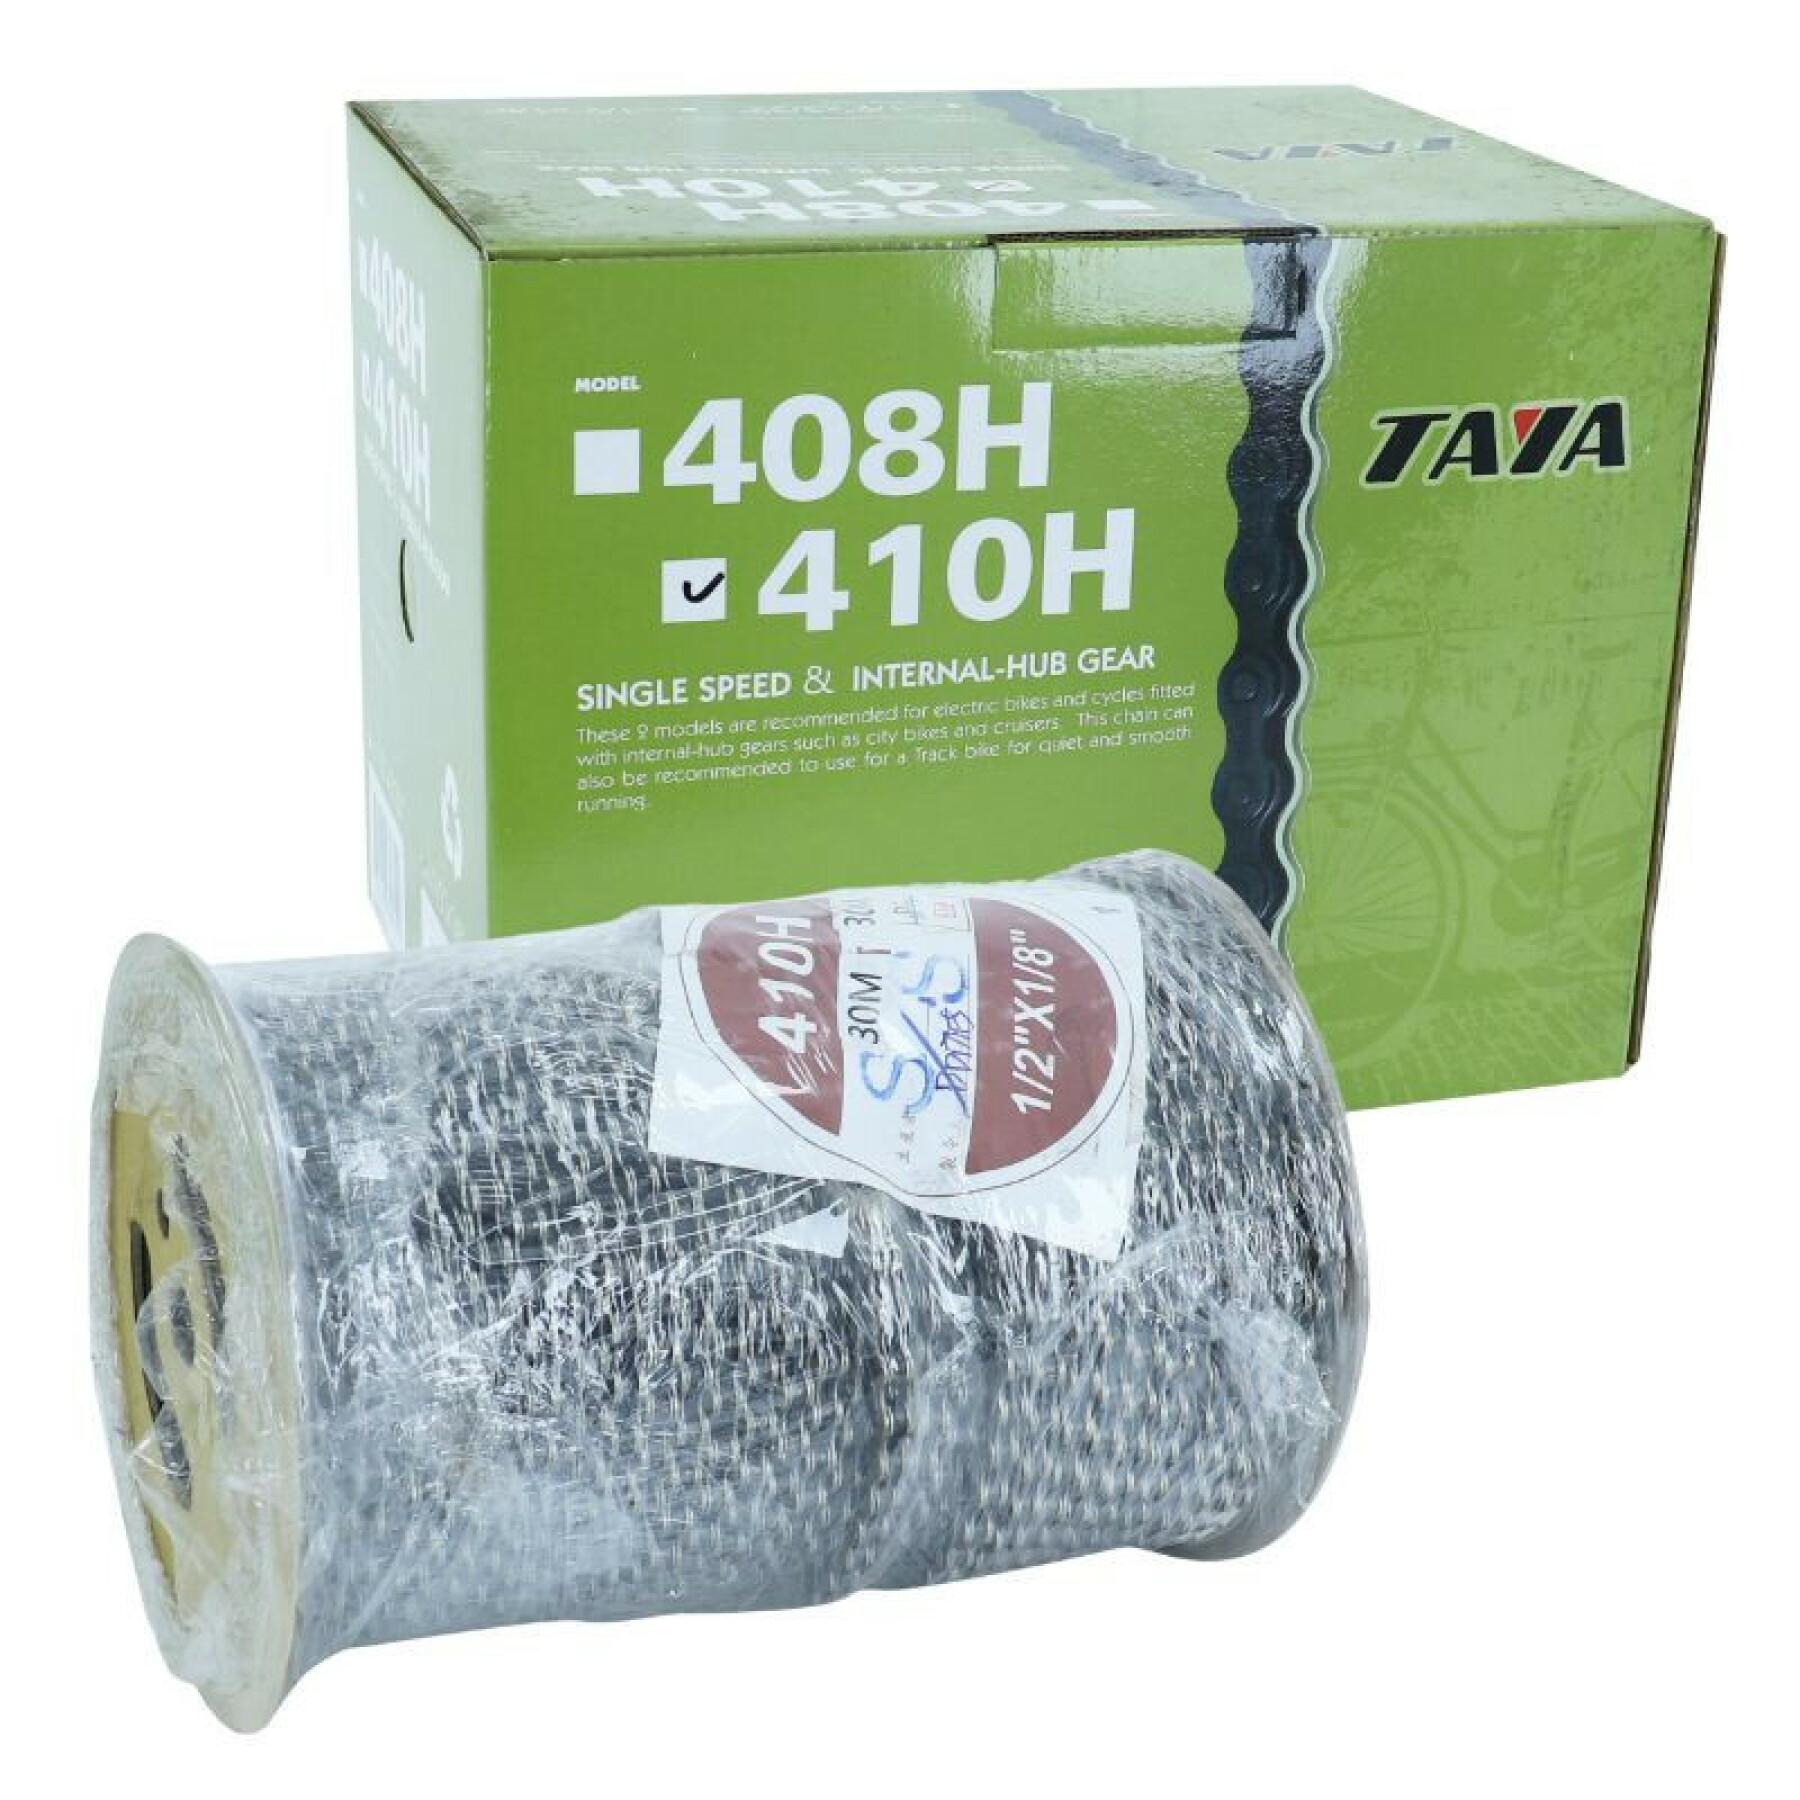 City roller chain with 30 connectors P2R Taya 410H 1-3 v